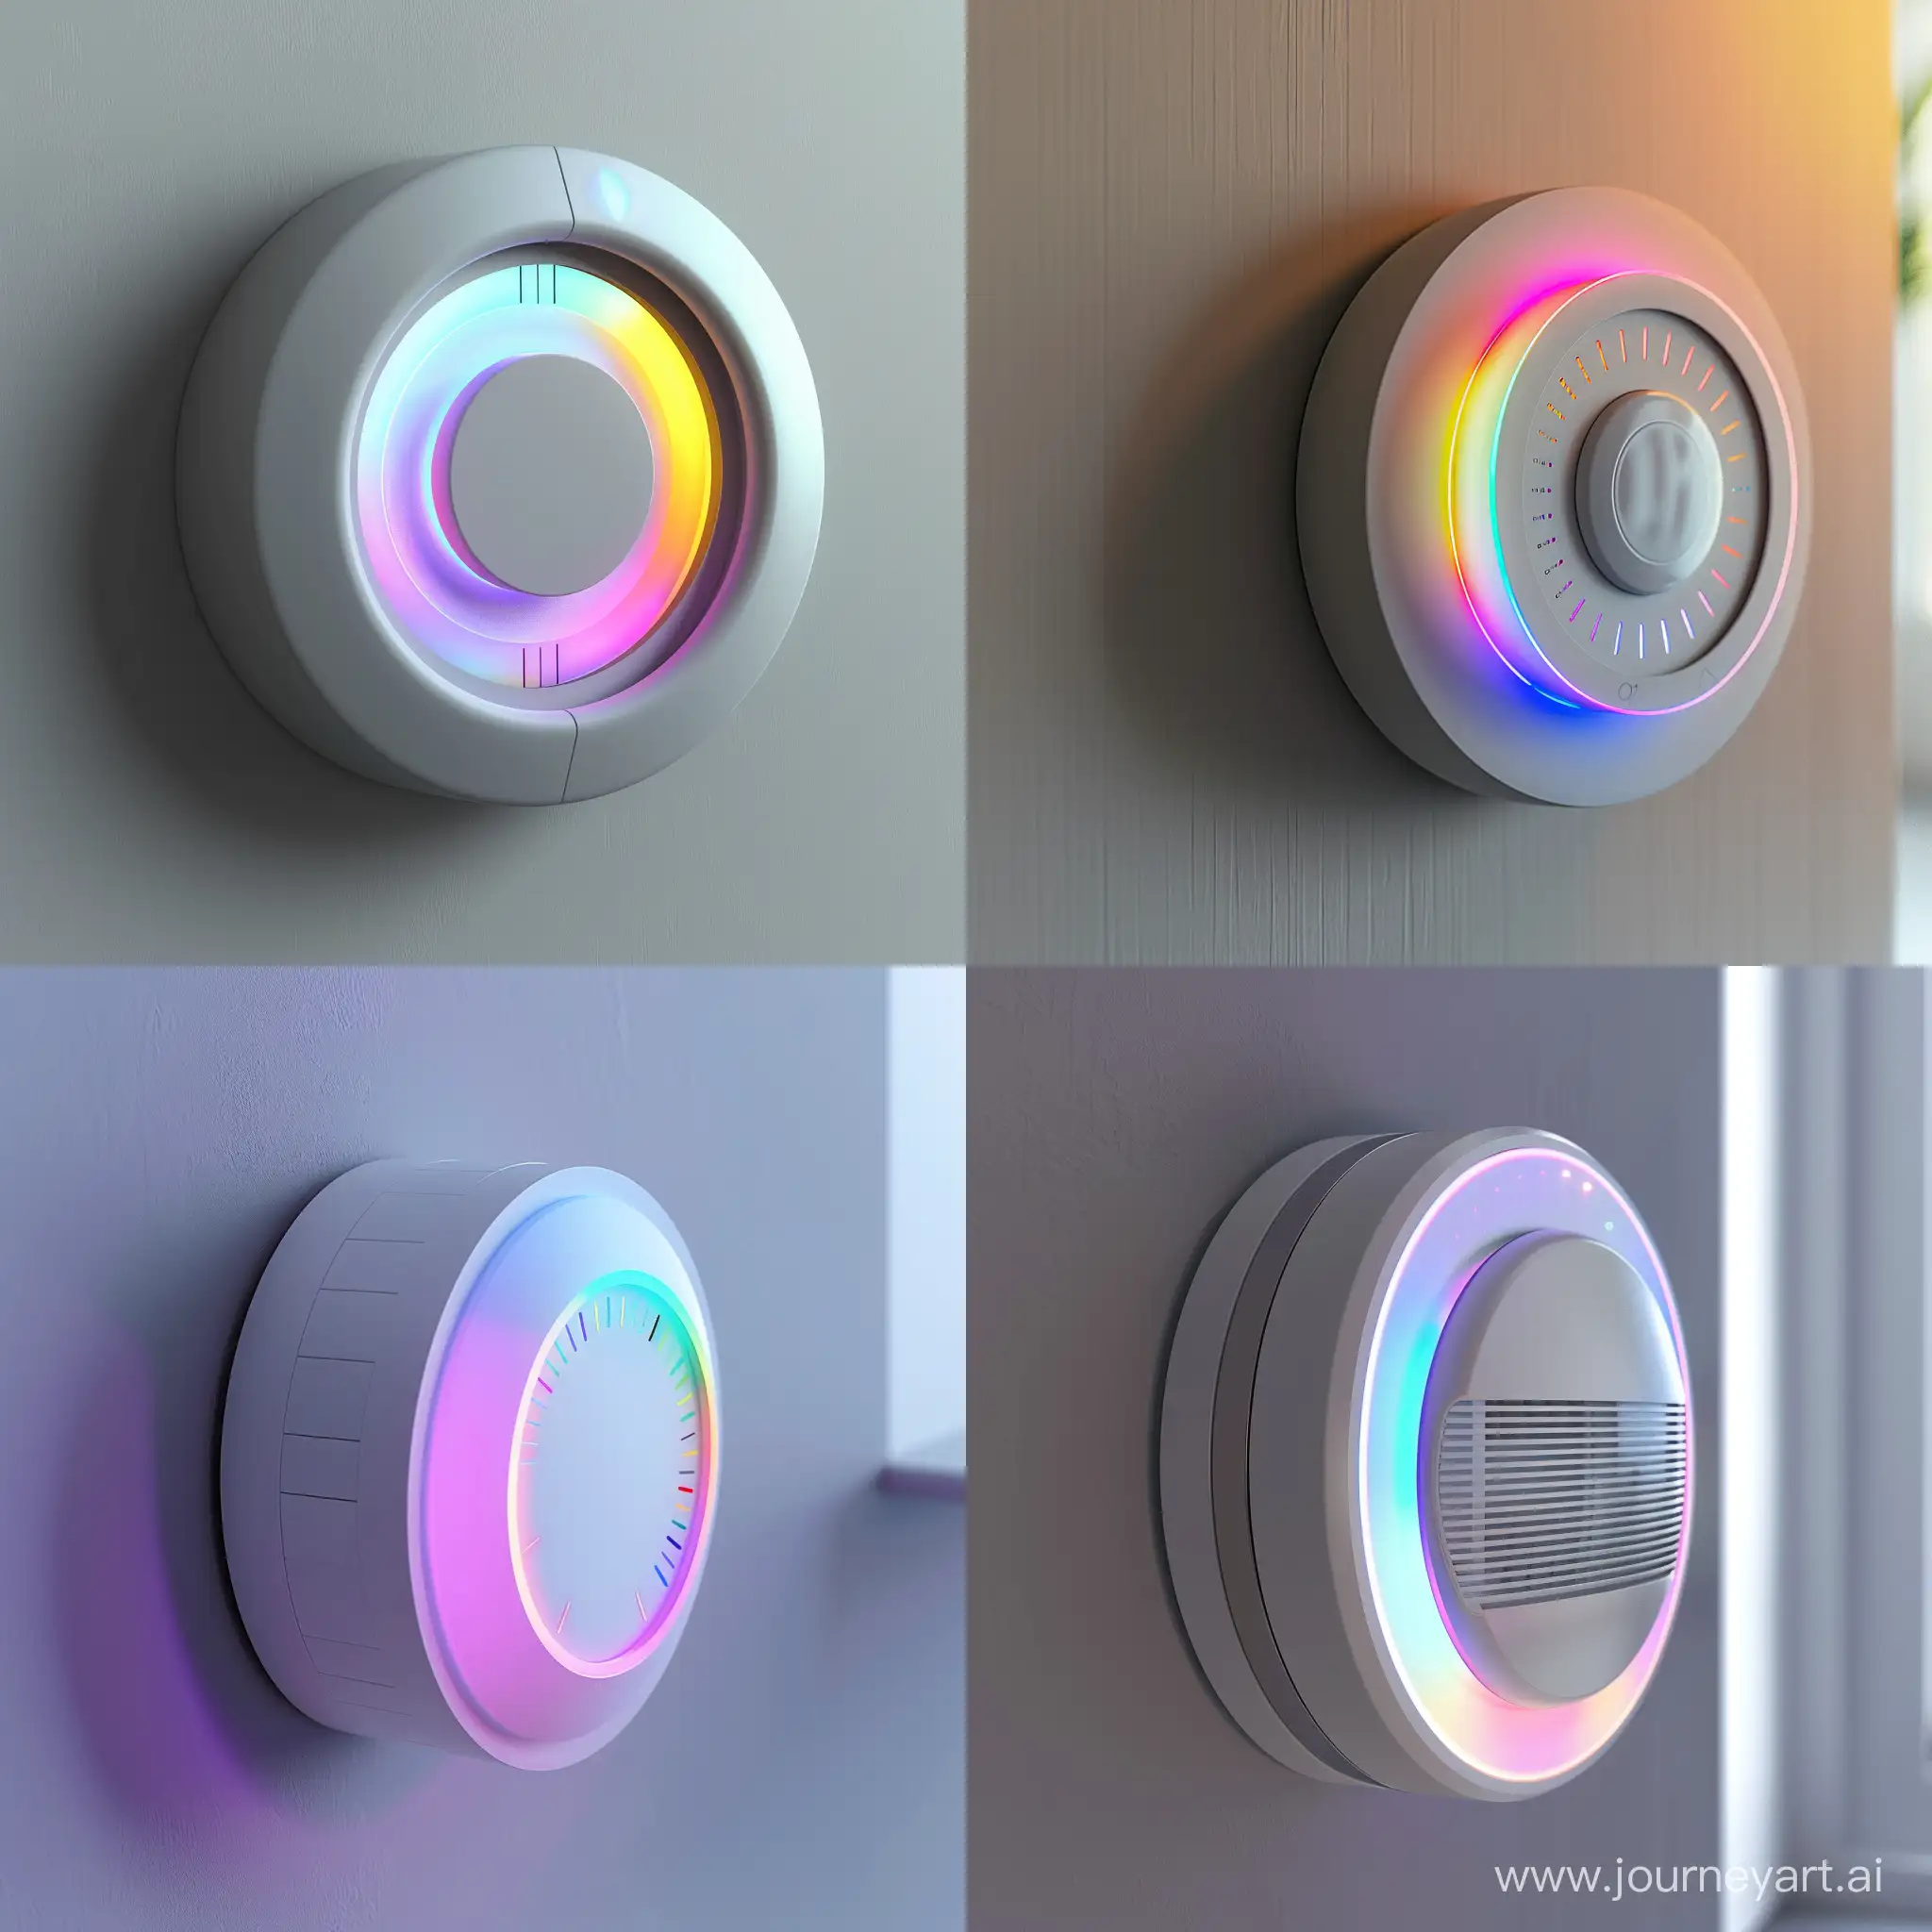 EcoFriendly-WallMounted-Light-Control-System-with-Tactile-Surface-and-LED-Ring